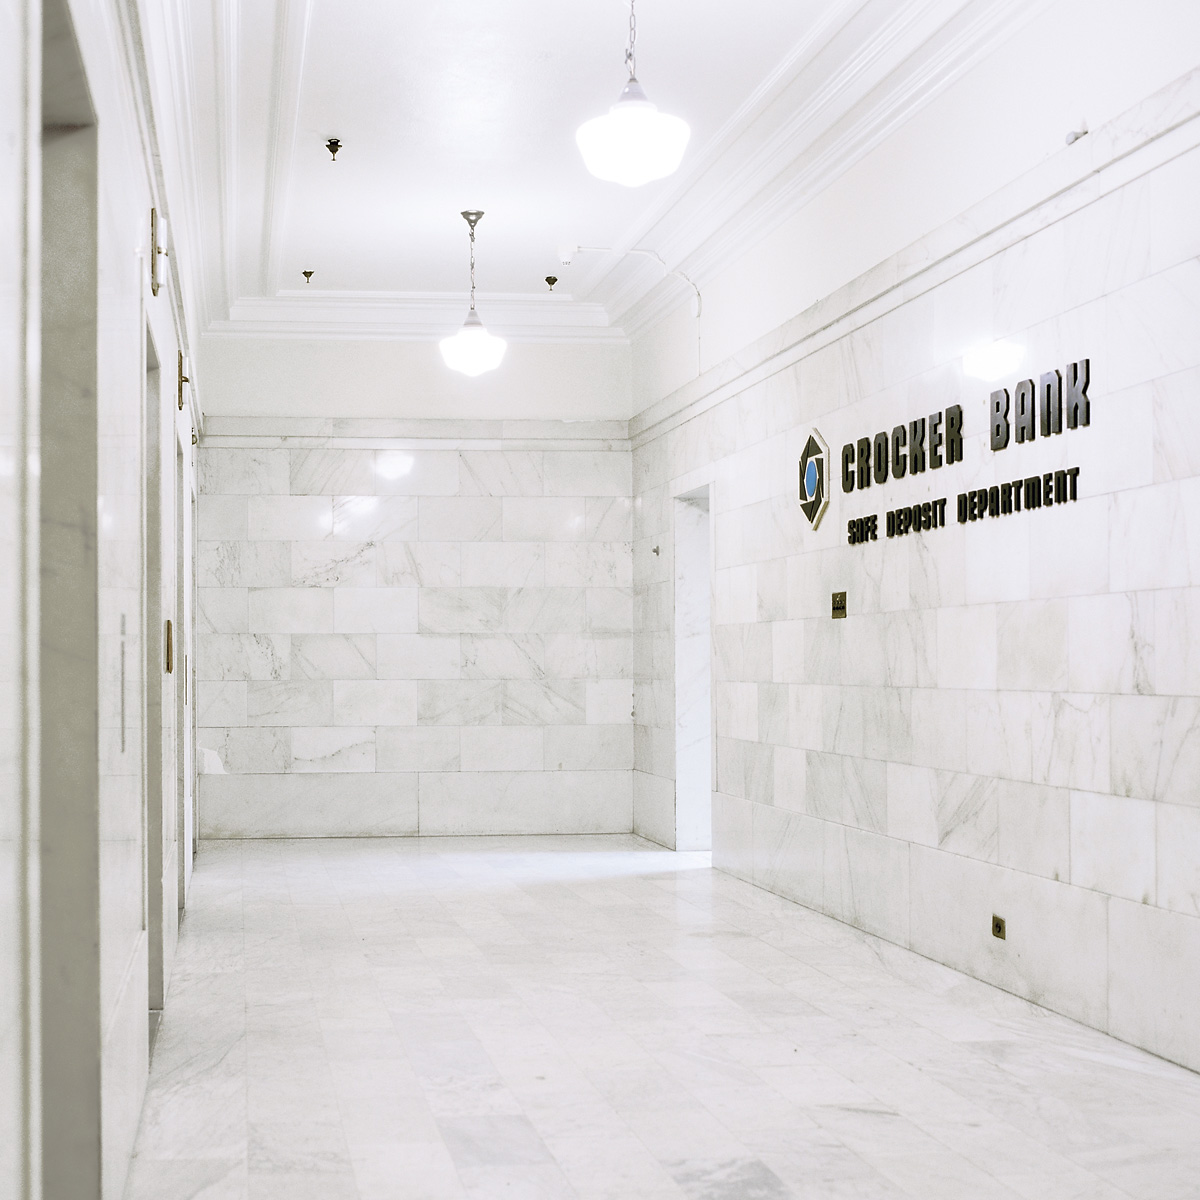 Stephen Austin Welch commercial director & advertising architectural photographer downtown Los Angeles crocker bank hallway